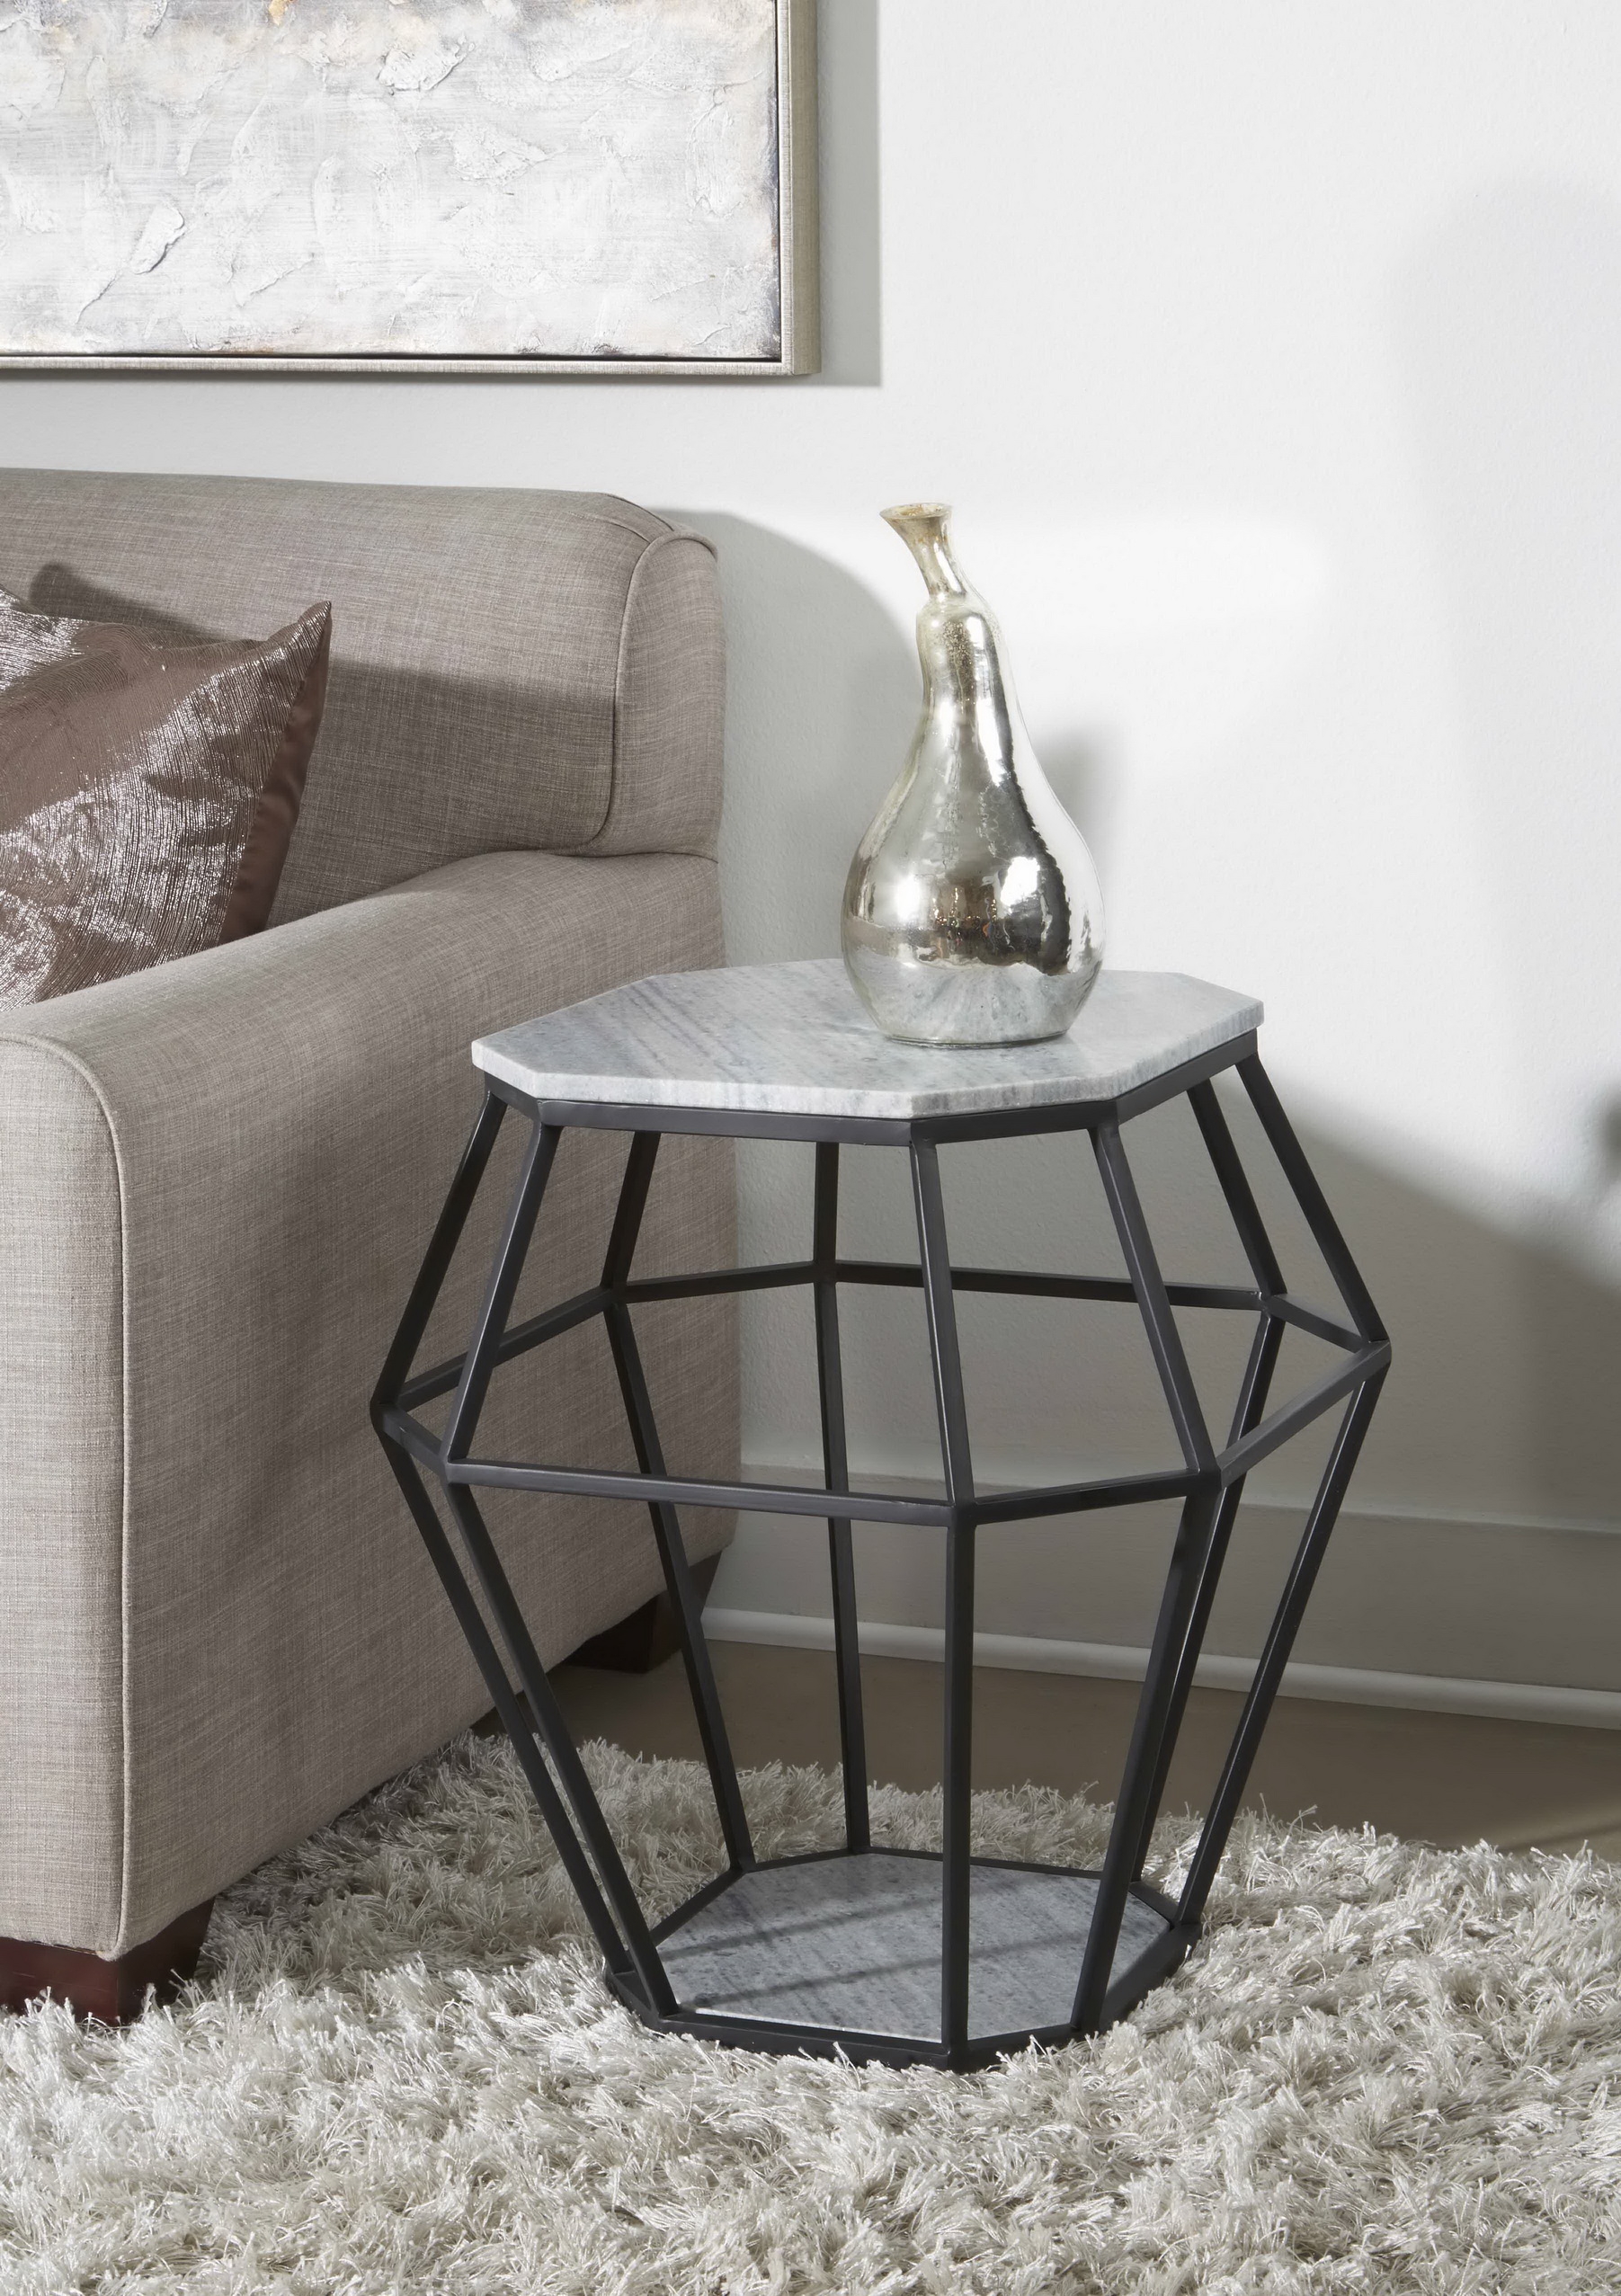 Octagonal Accent Table - Whispy Grey Marble & Black Powder Coat - Image 3